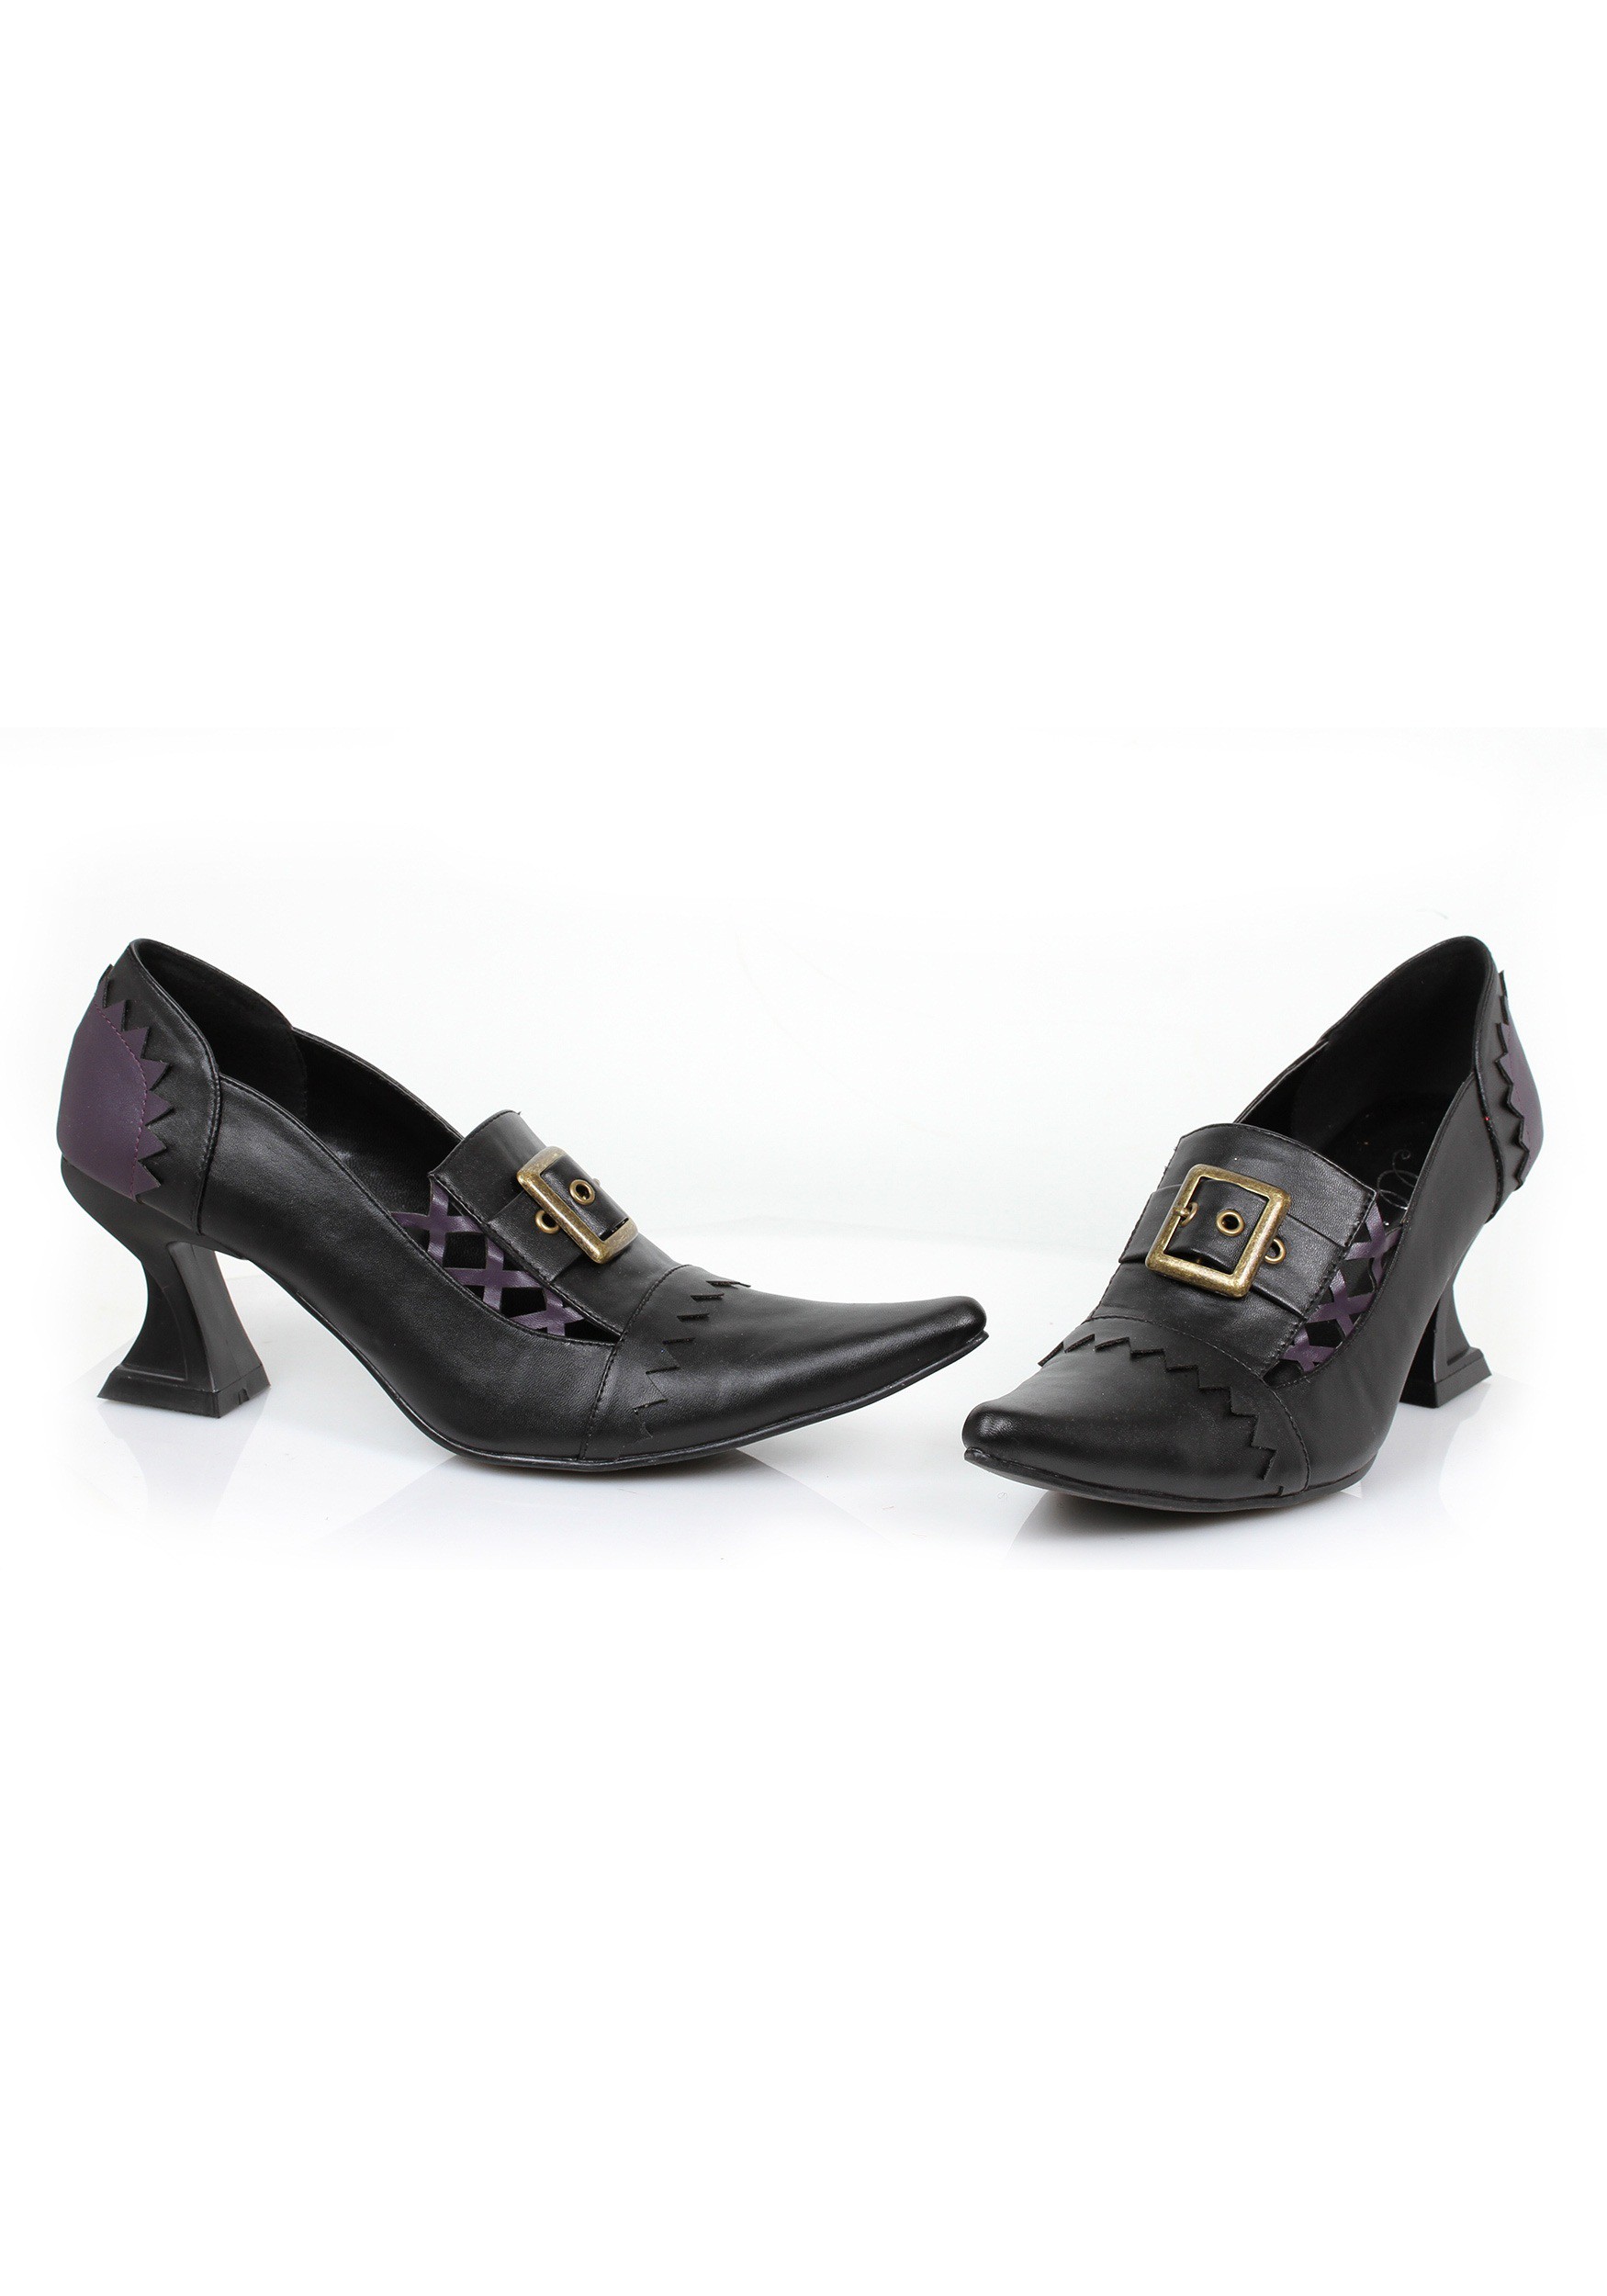 Deluxe Witch Women's Shoes